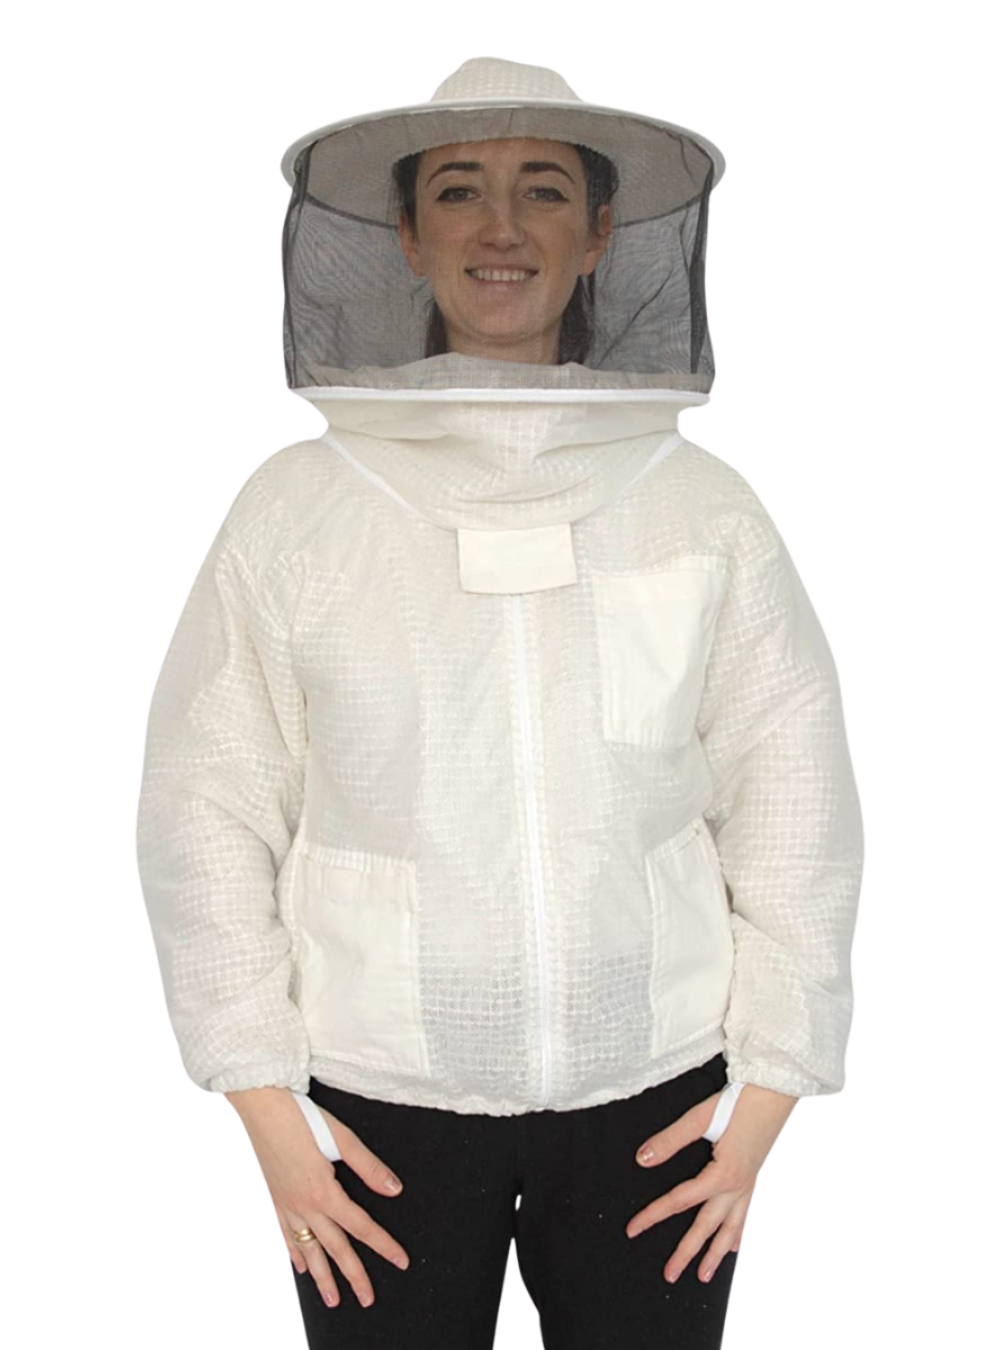  A white 3 Layer Mesh Ultra Vented Beekeeping Jacket with a protective hood